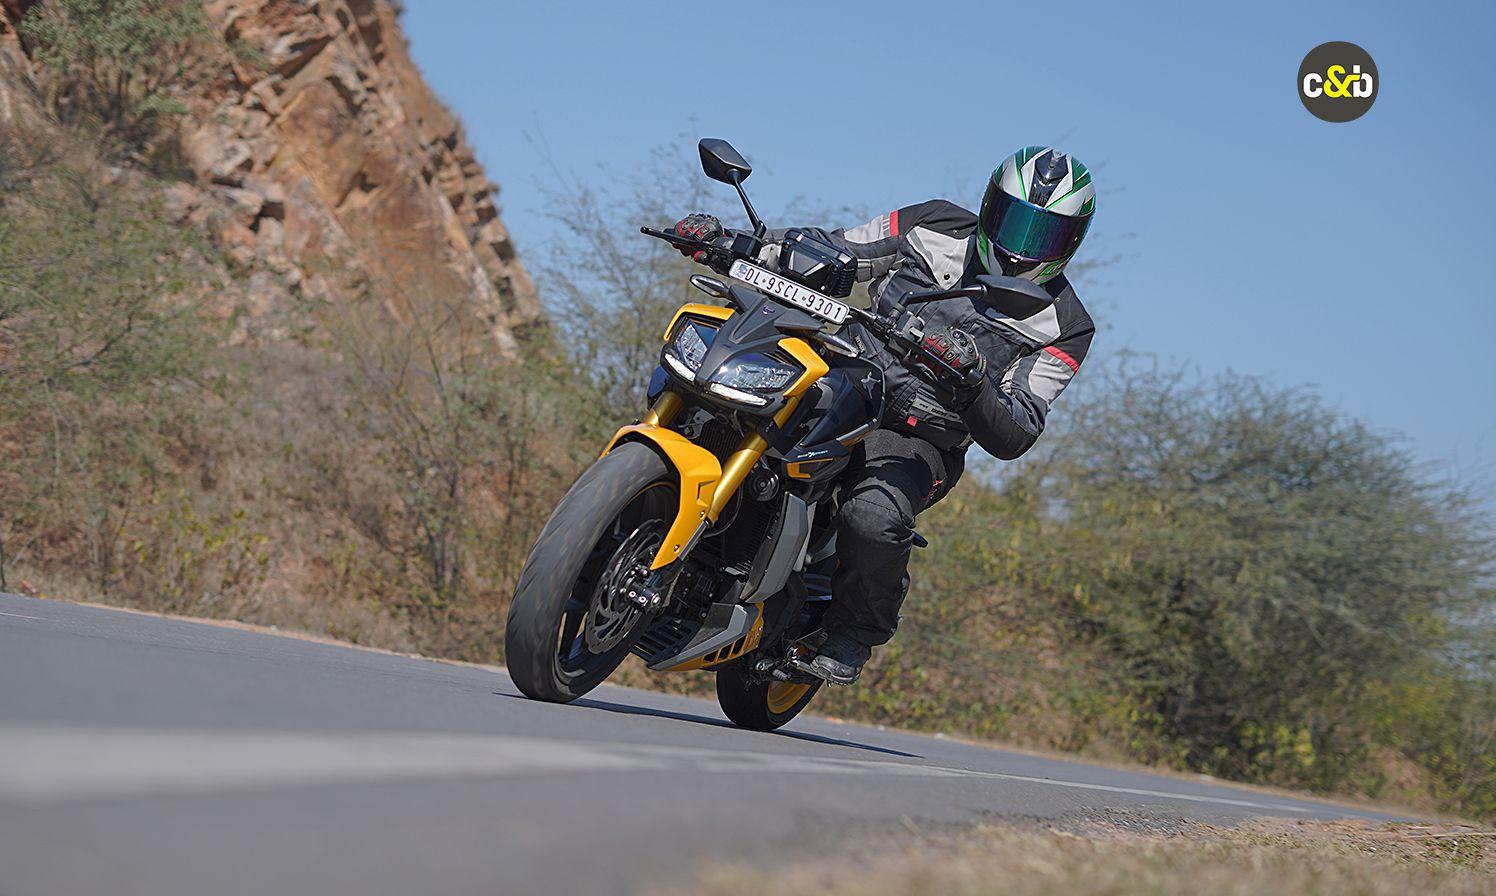 Latest Reviews on Apache RTR 310 